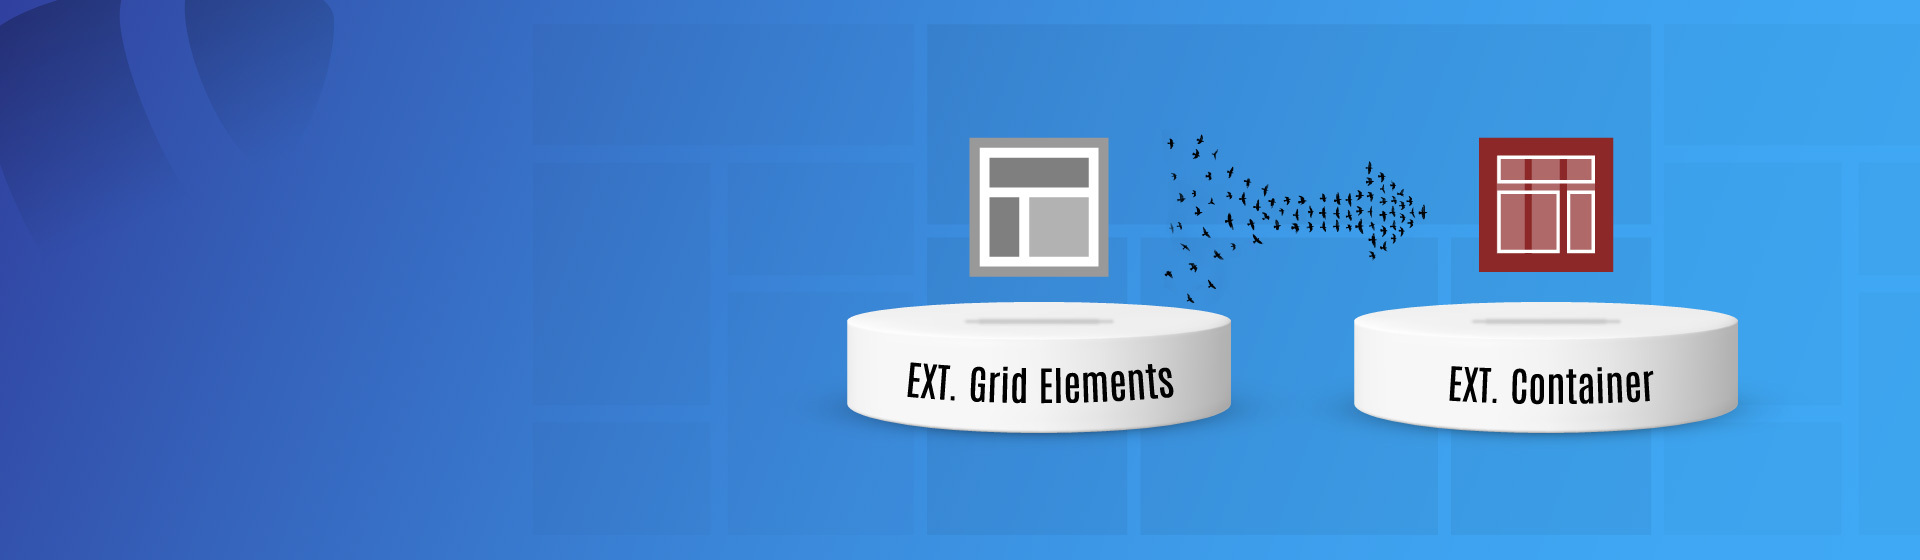 How to Migrate Grid Elements to Container Extension in TYPO3?